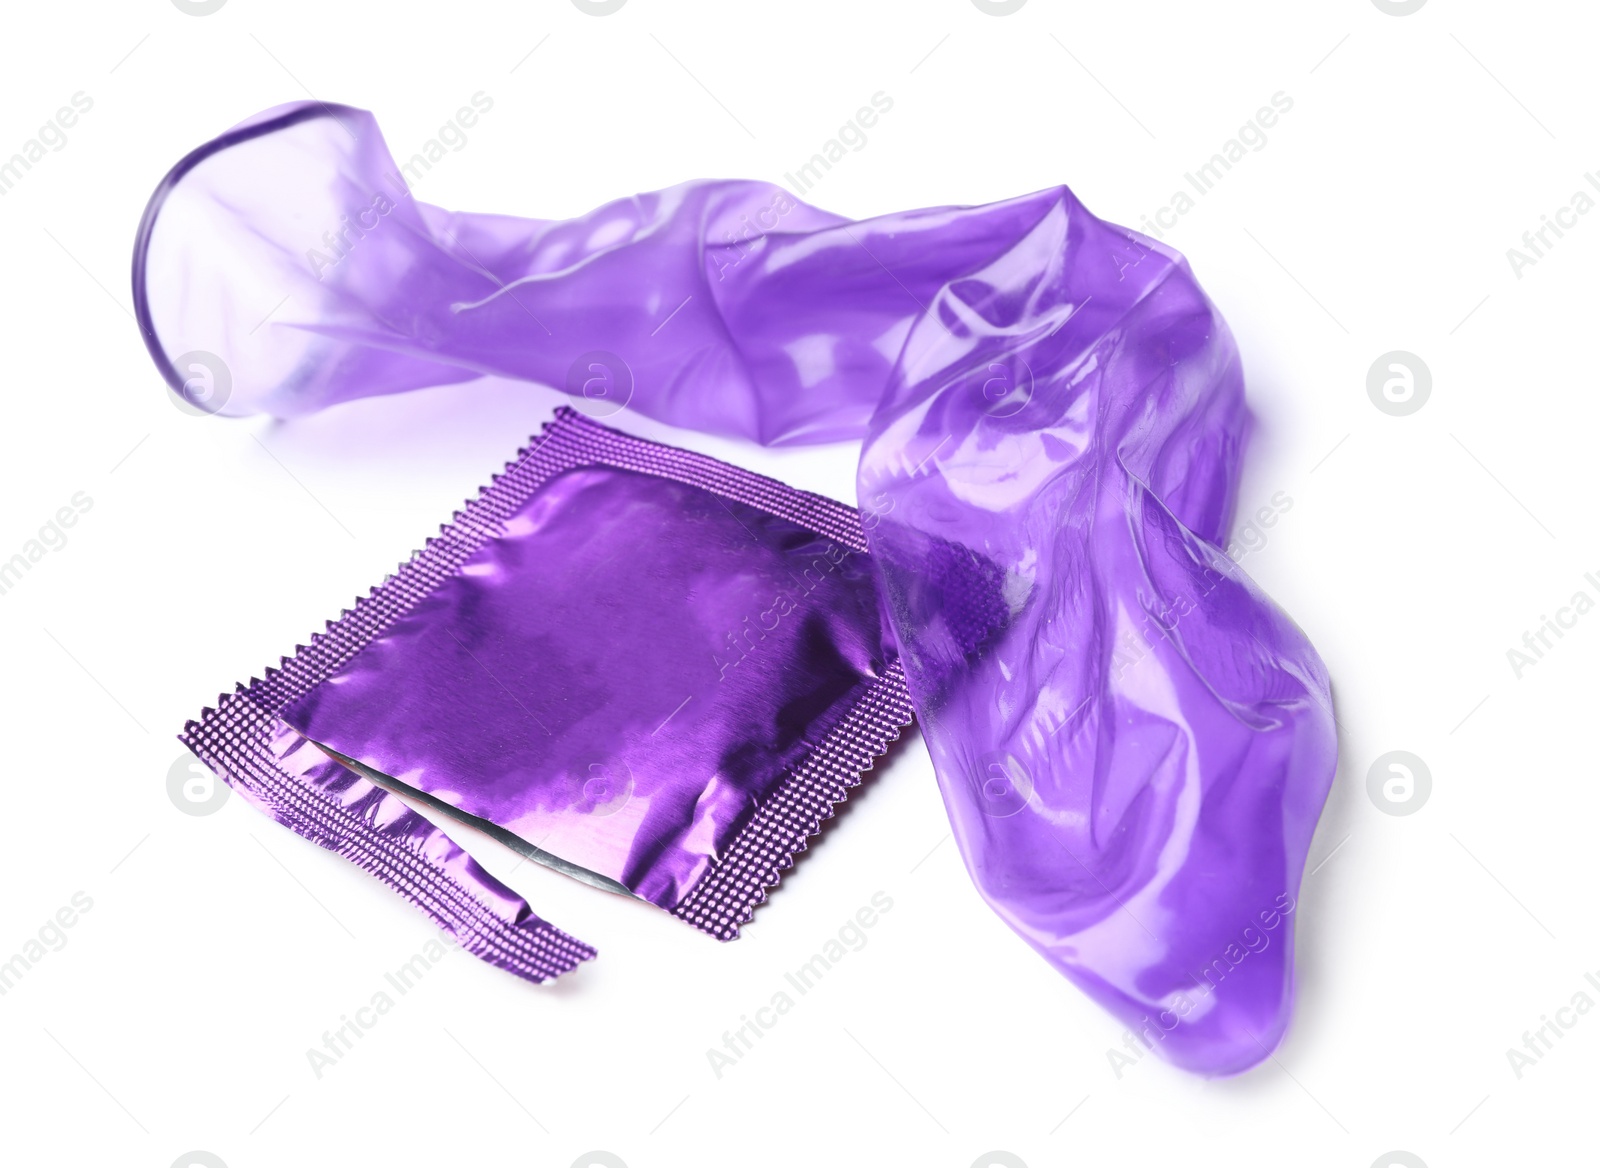 Image of Unrolled violet condom and package on white background. Safe sex